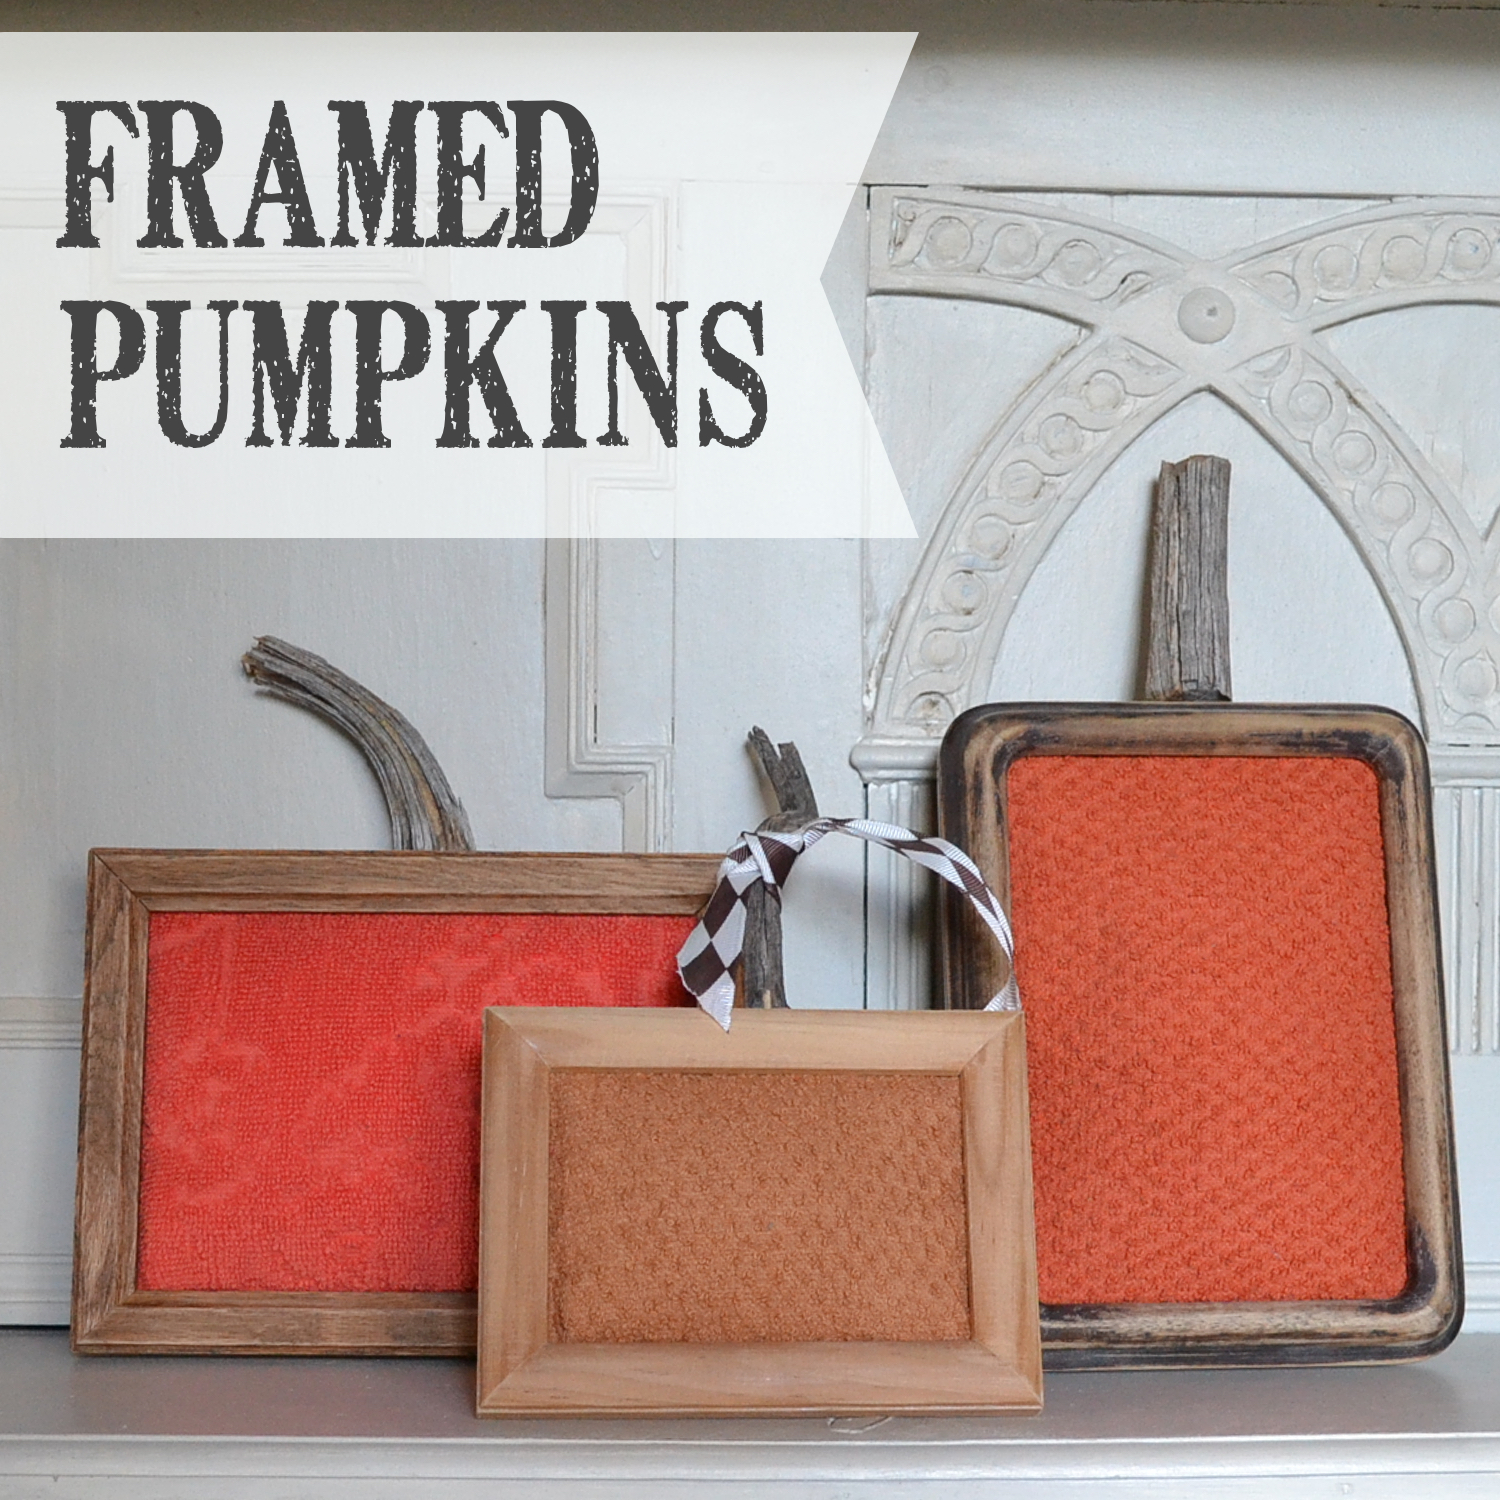 Framed pumpkins a DIY project adding autumn colors in frames with batting for the bulge. Sticks for stems | countrydesignstyle.com